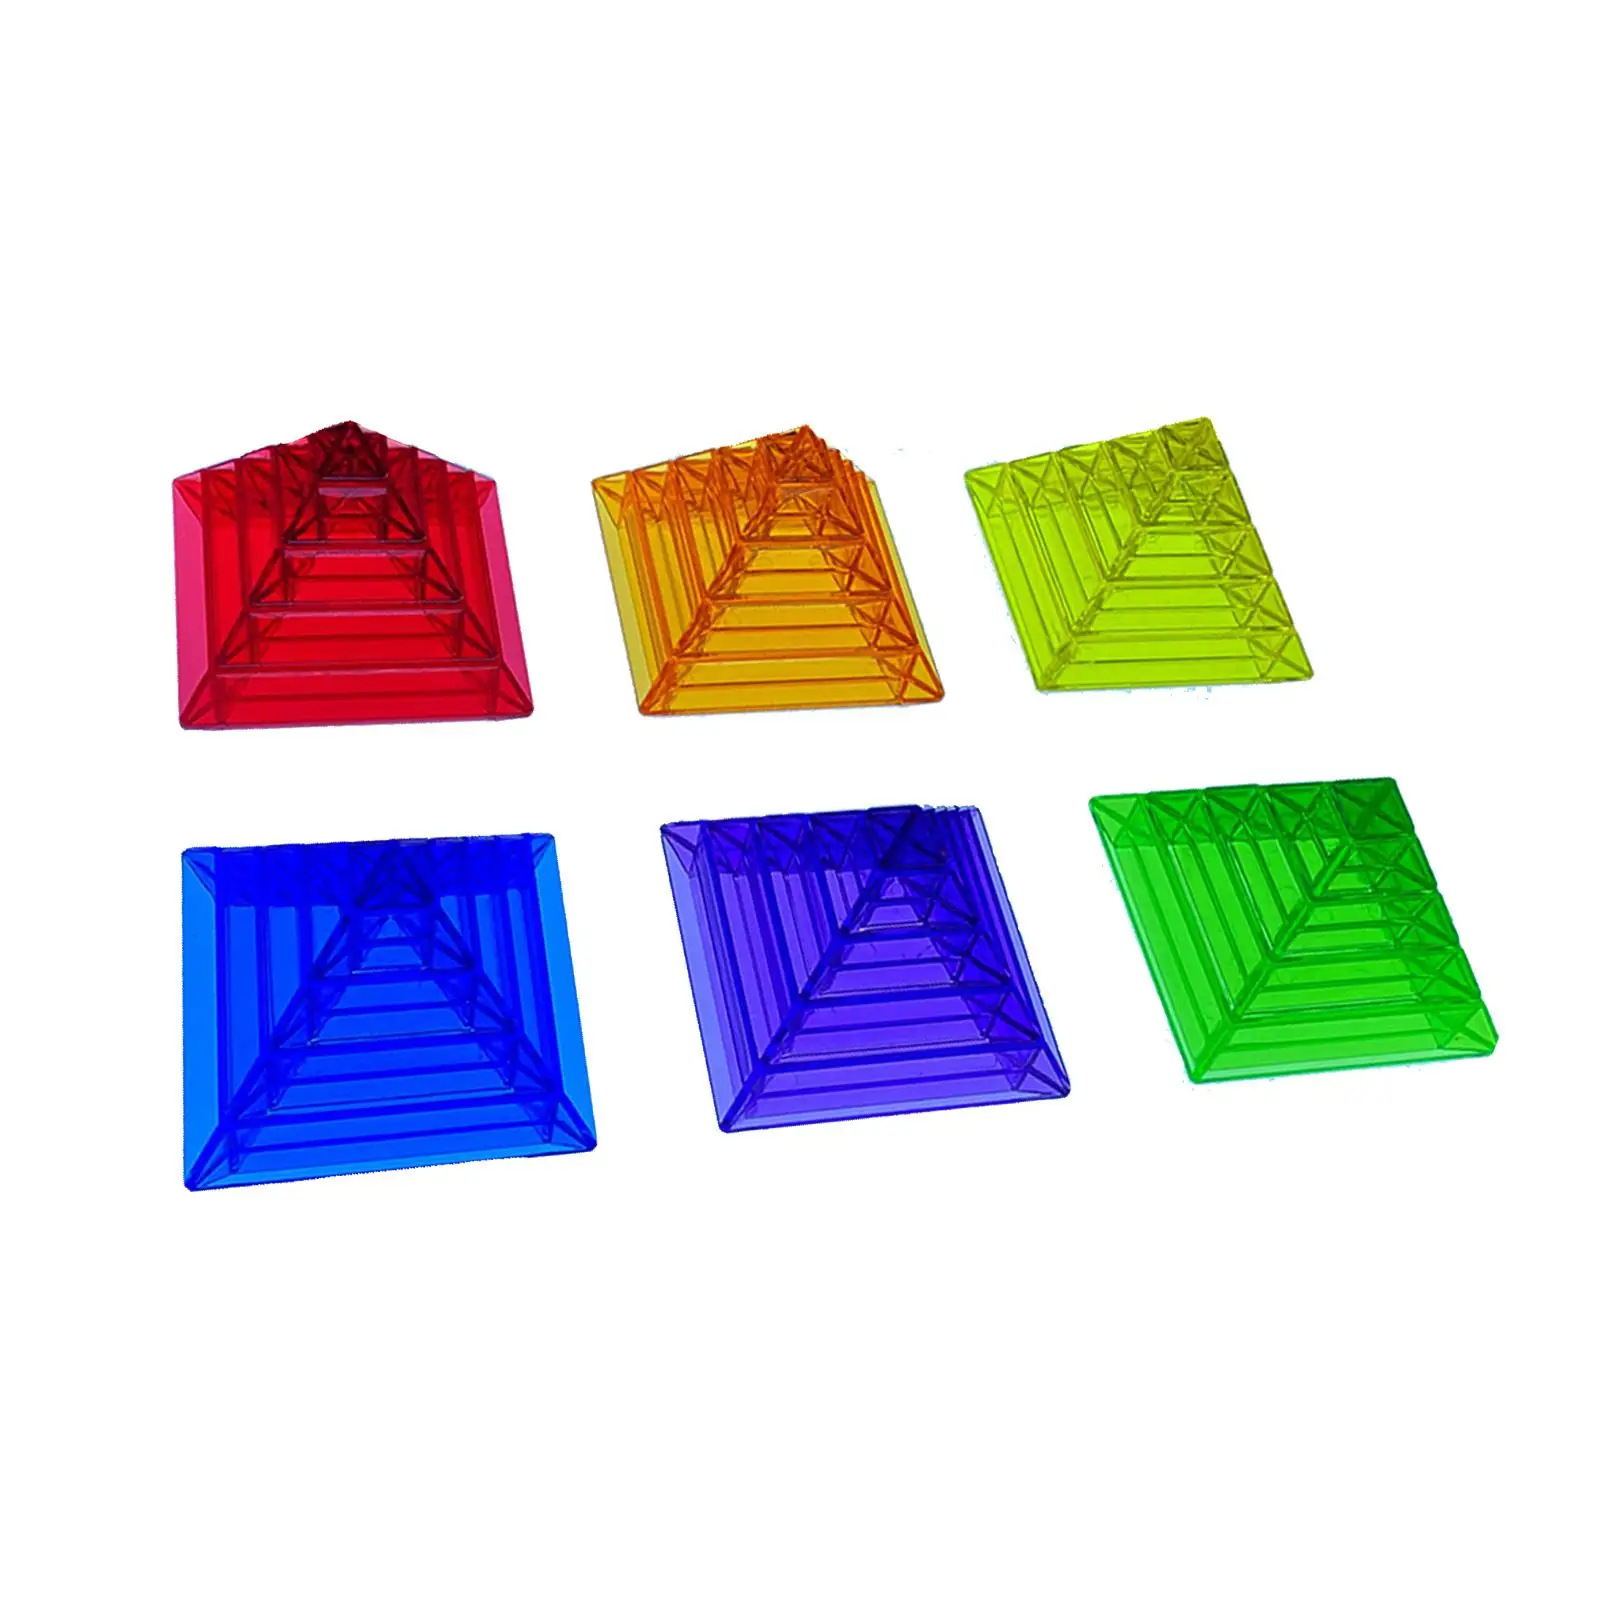 Transparent Pyramid  Toys Tower Puzzles  Coordination Stacking Creative Ability for Children